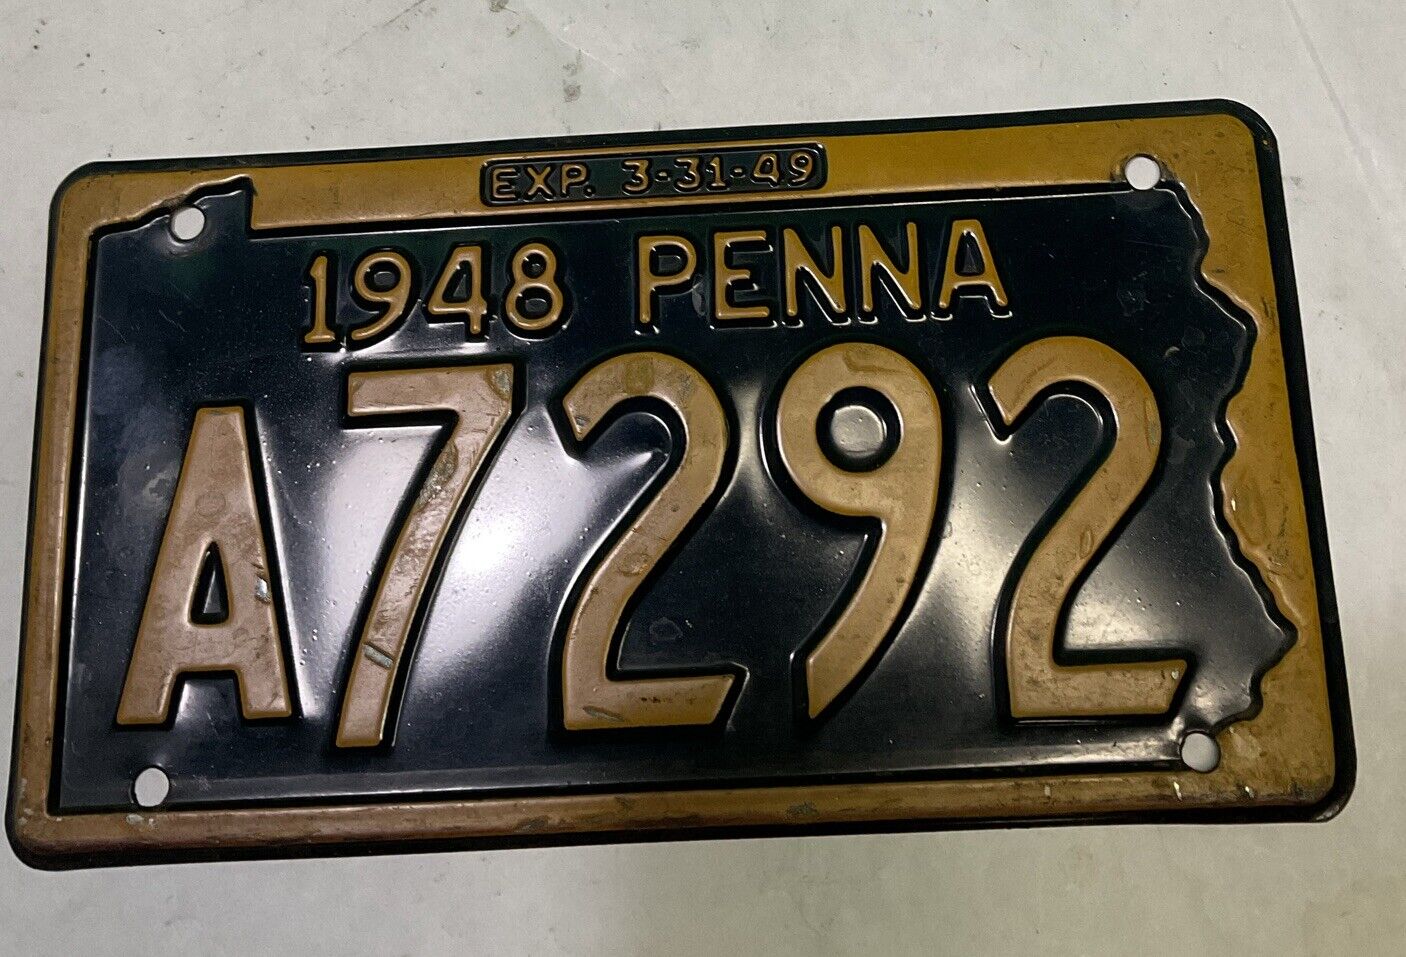 Vintage 1948 PENNA License Plate A7292 EXP. 3-31-49 Yellow With Blue